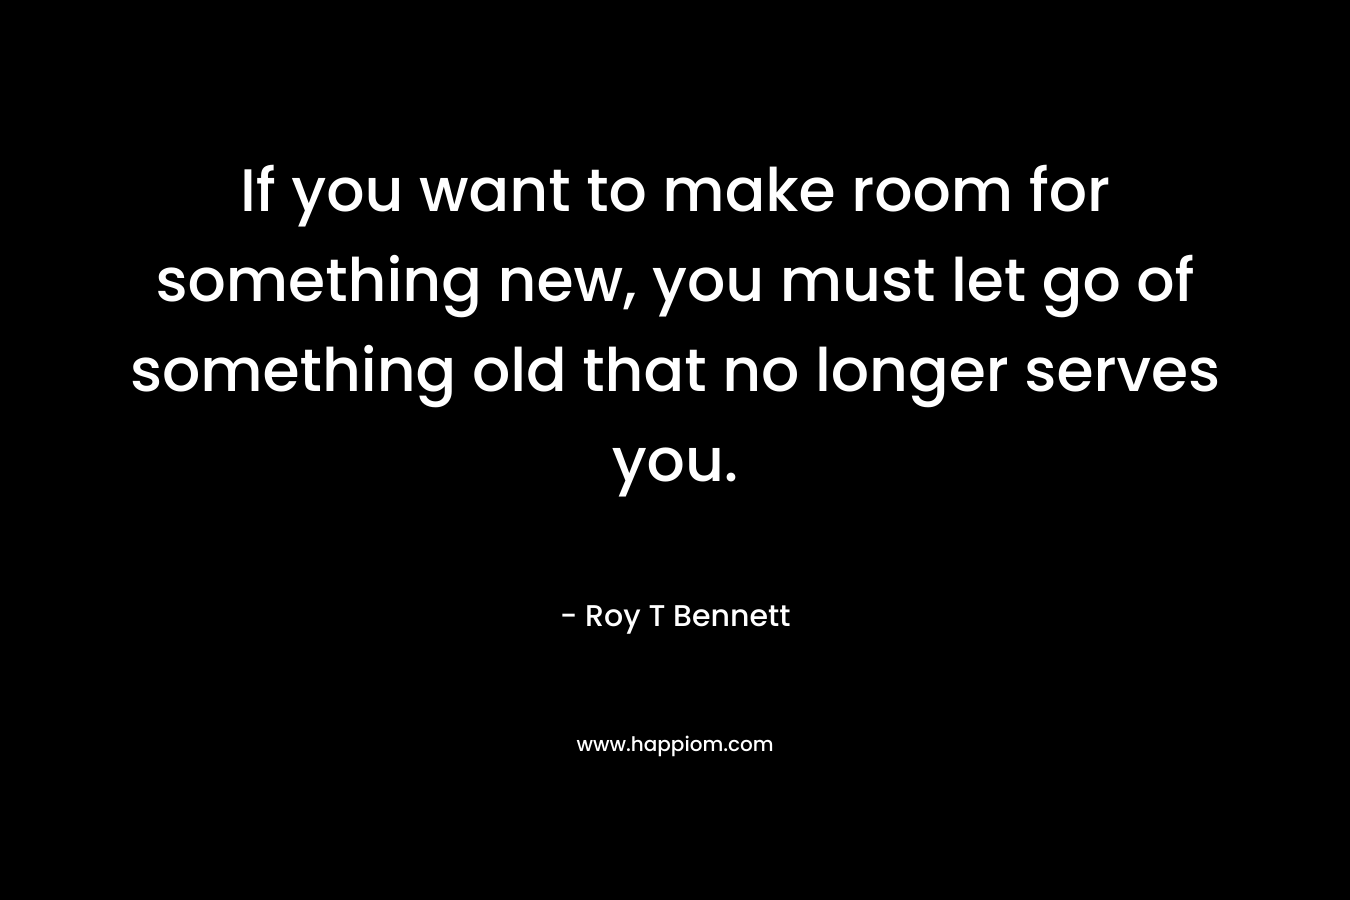 If you want to make room for something new, you must let go of something old that no longer serves you. – Roy T Bennett